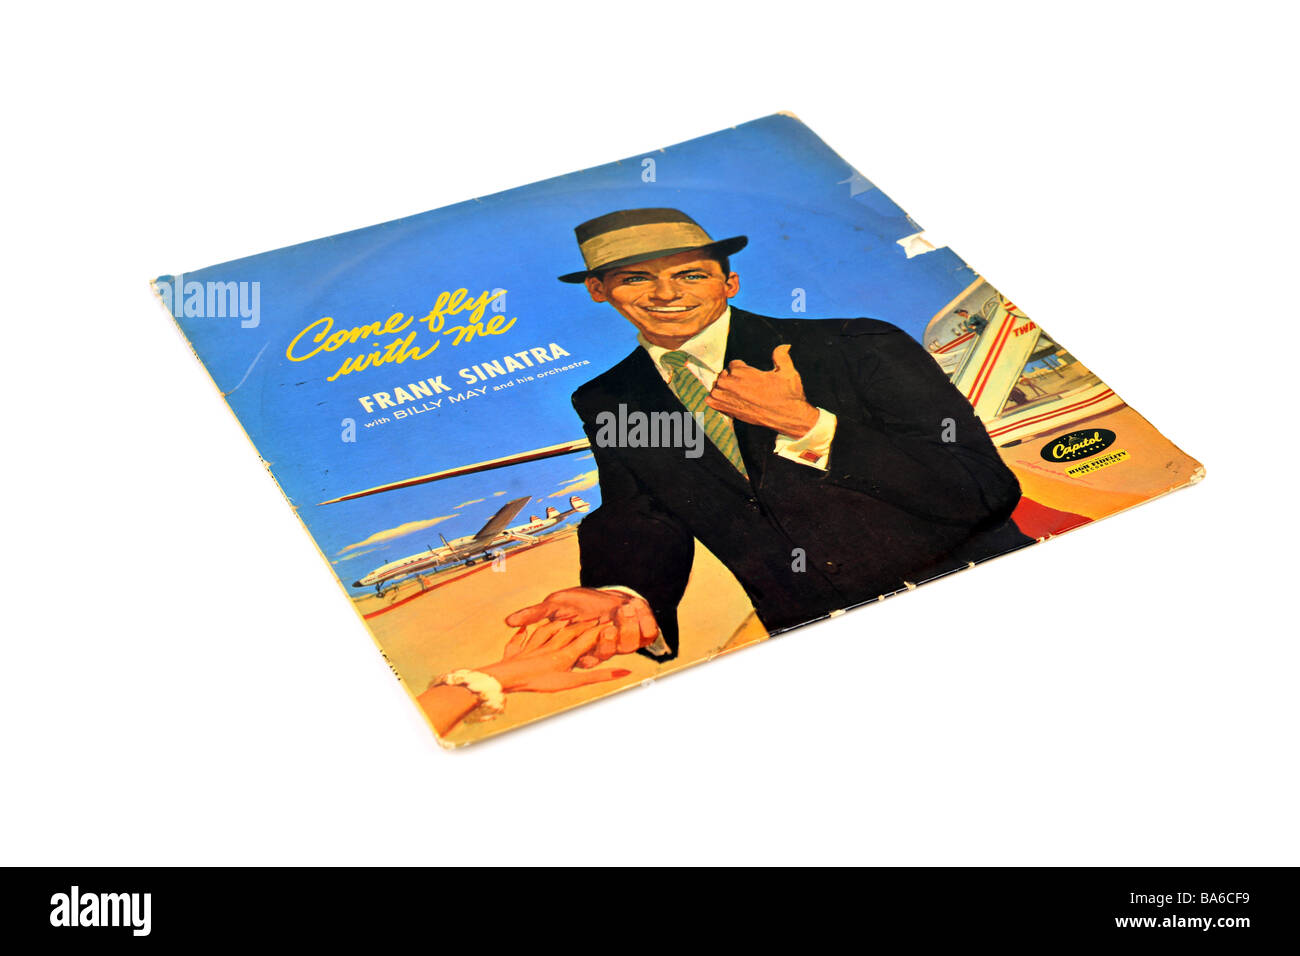 A 1960s Record Sleeve Depicting Artwork For The Film Come Fly With